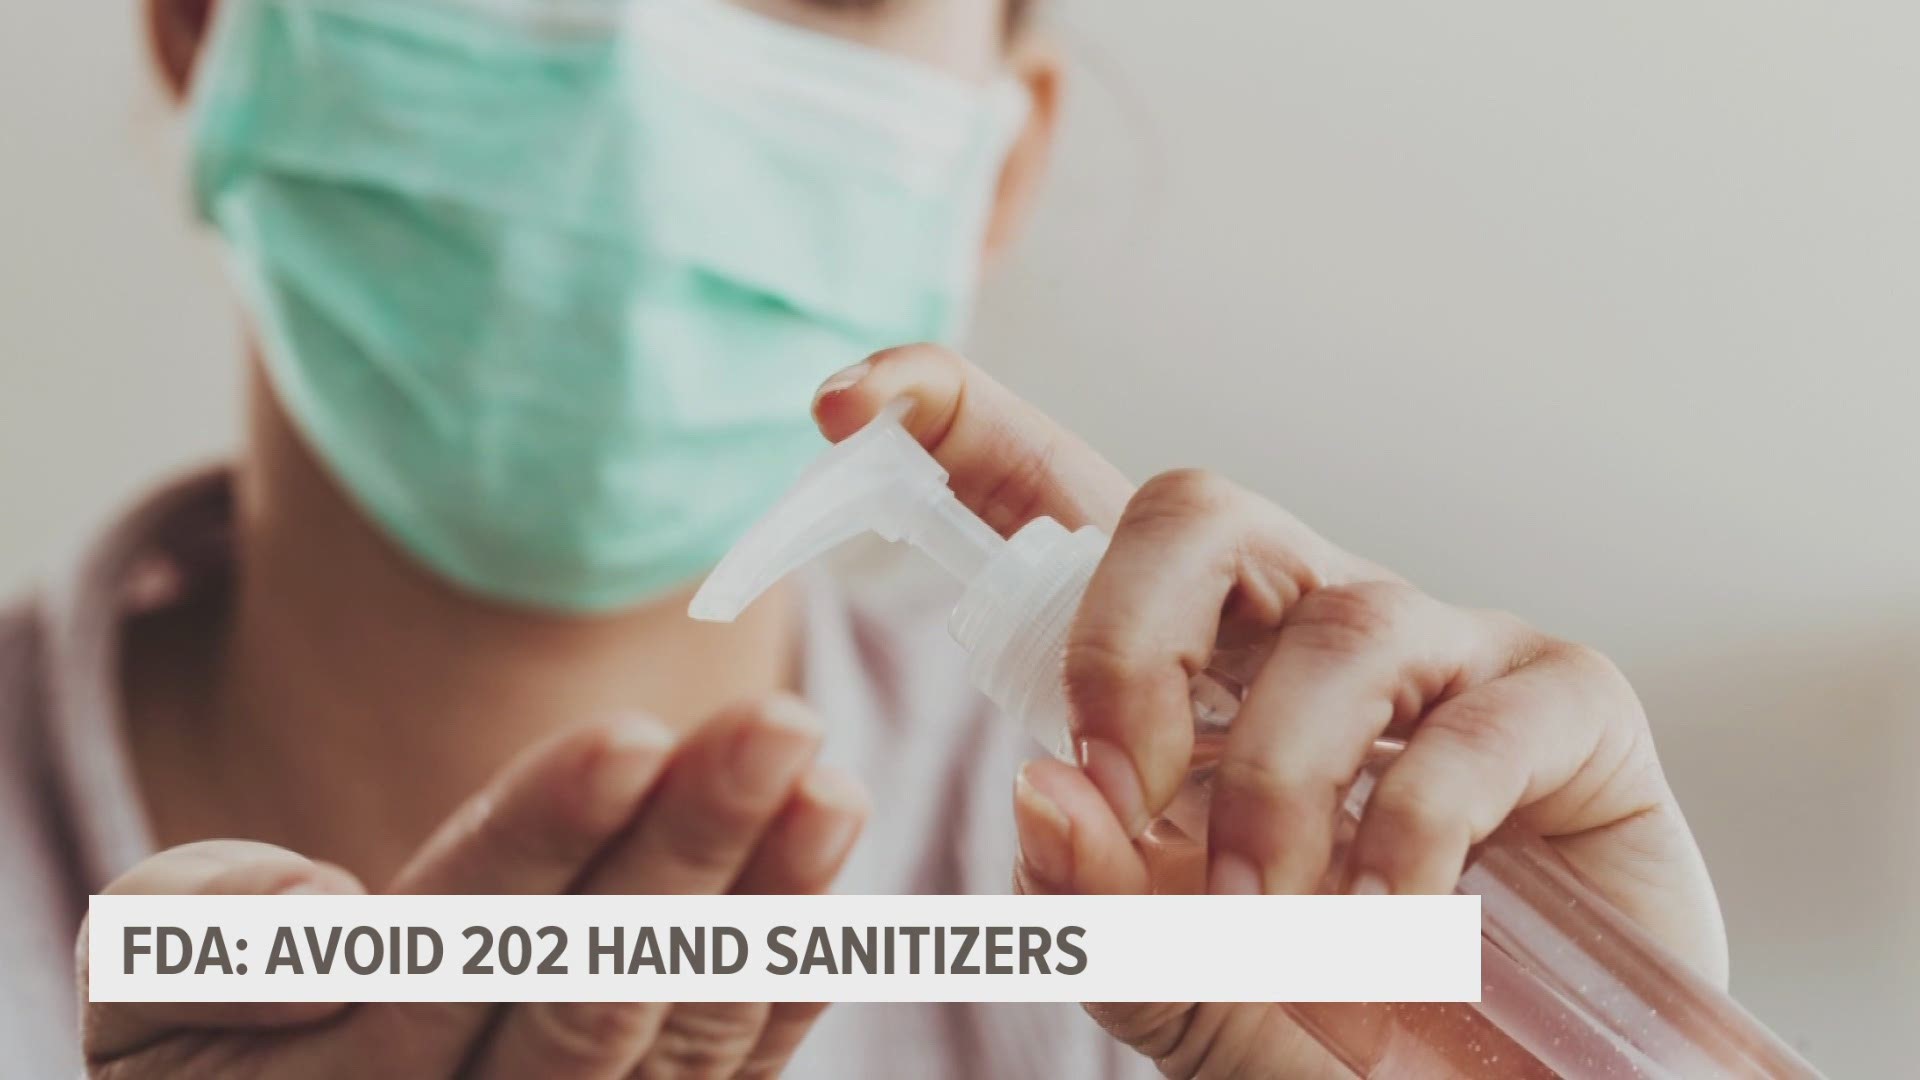 The hand sanitizers may be toxic due to methanol or 1-propanol, or they may have less than the required amount of alcohol.